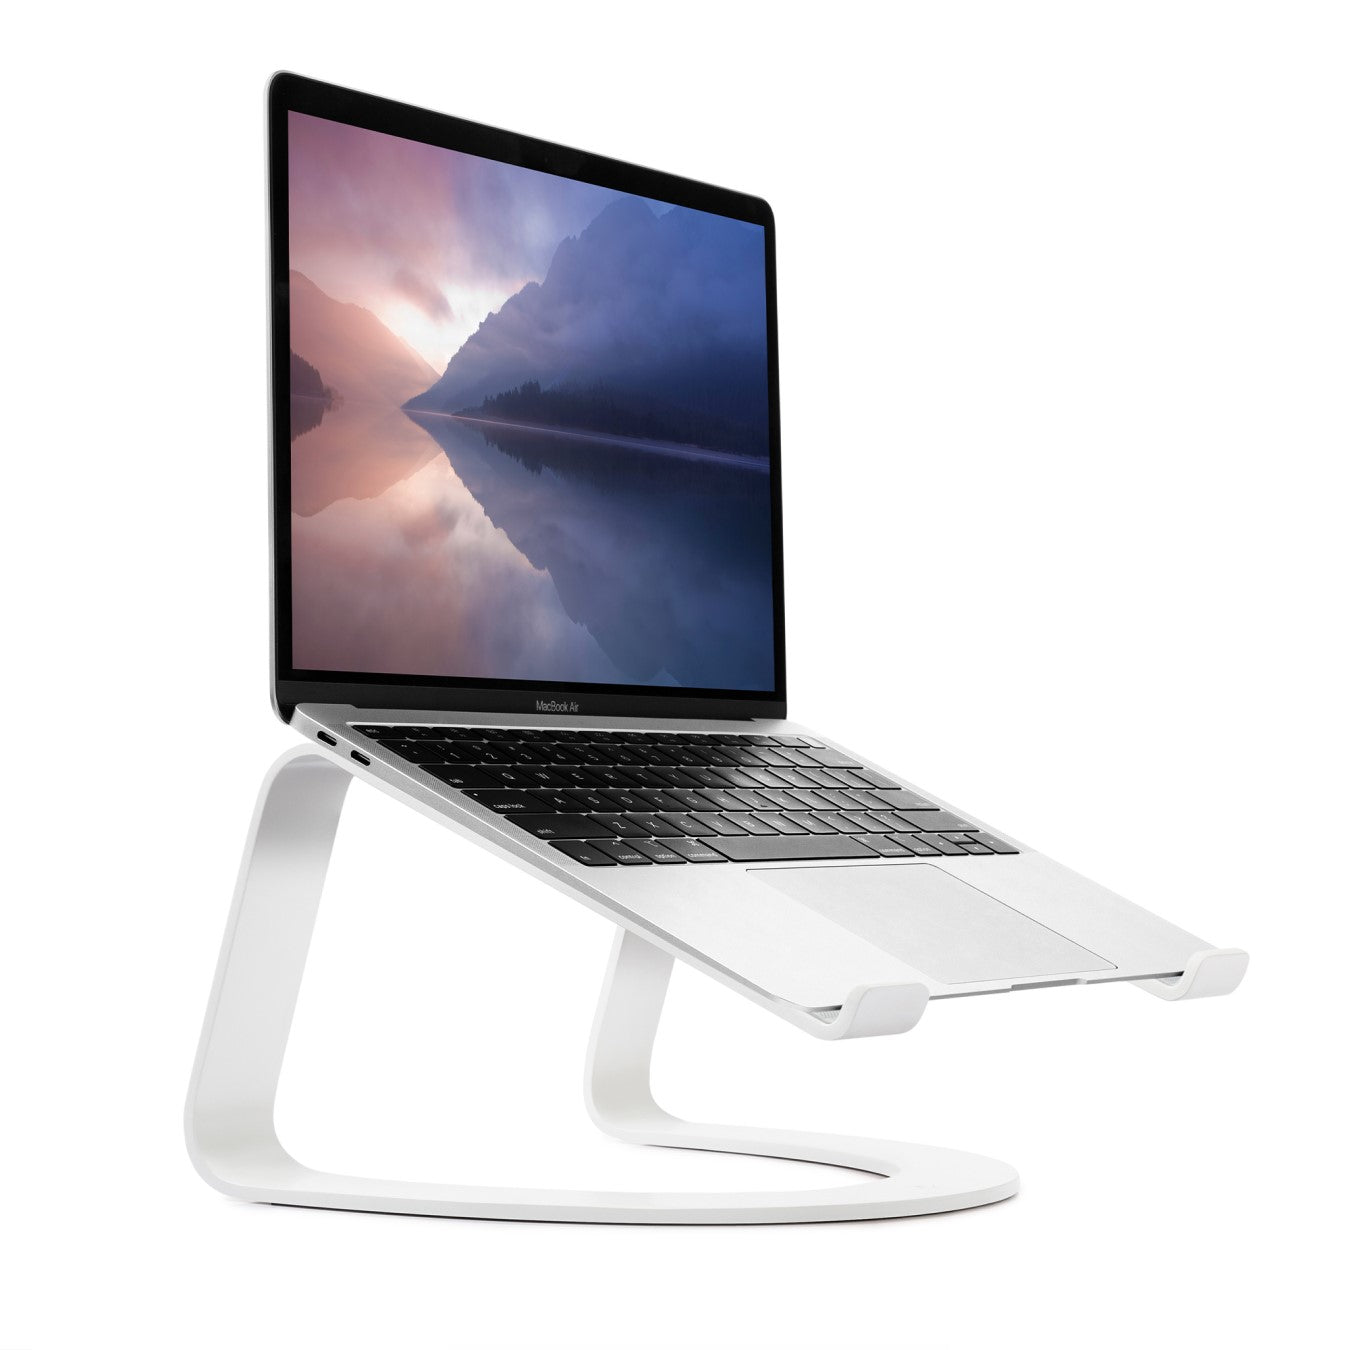 The Twelve South Curve Stand for MacBook in white holding a MacBook Pro with the screen on